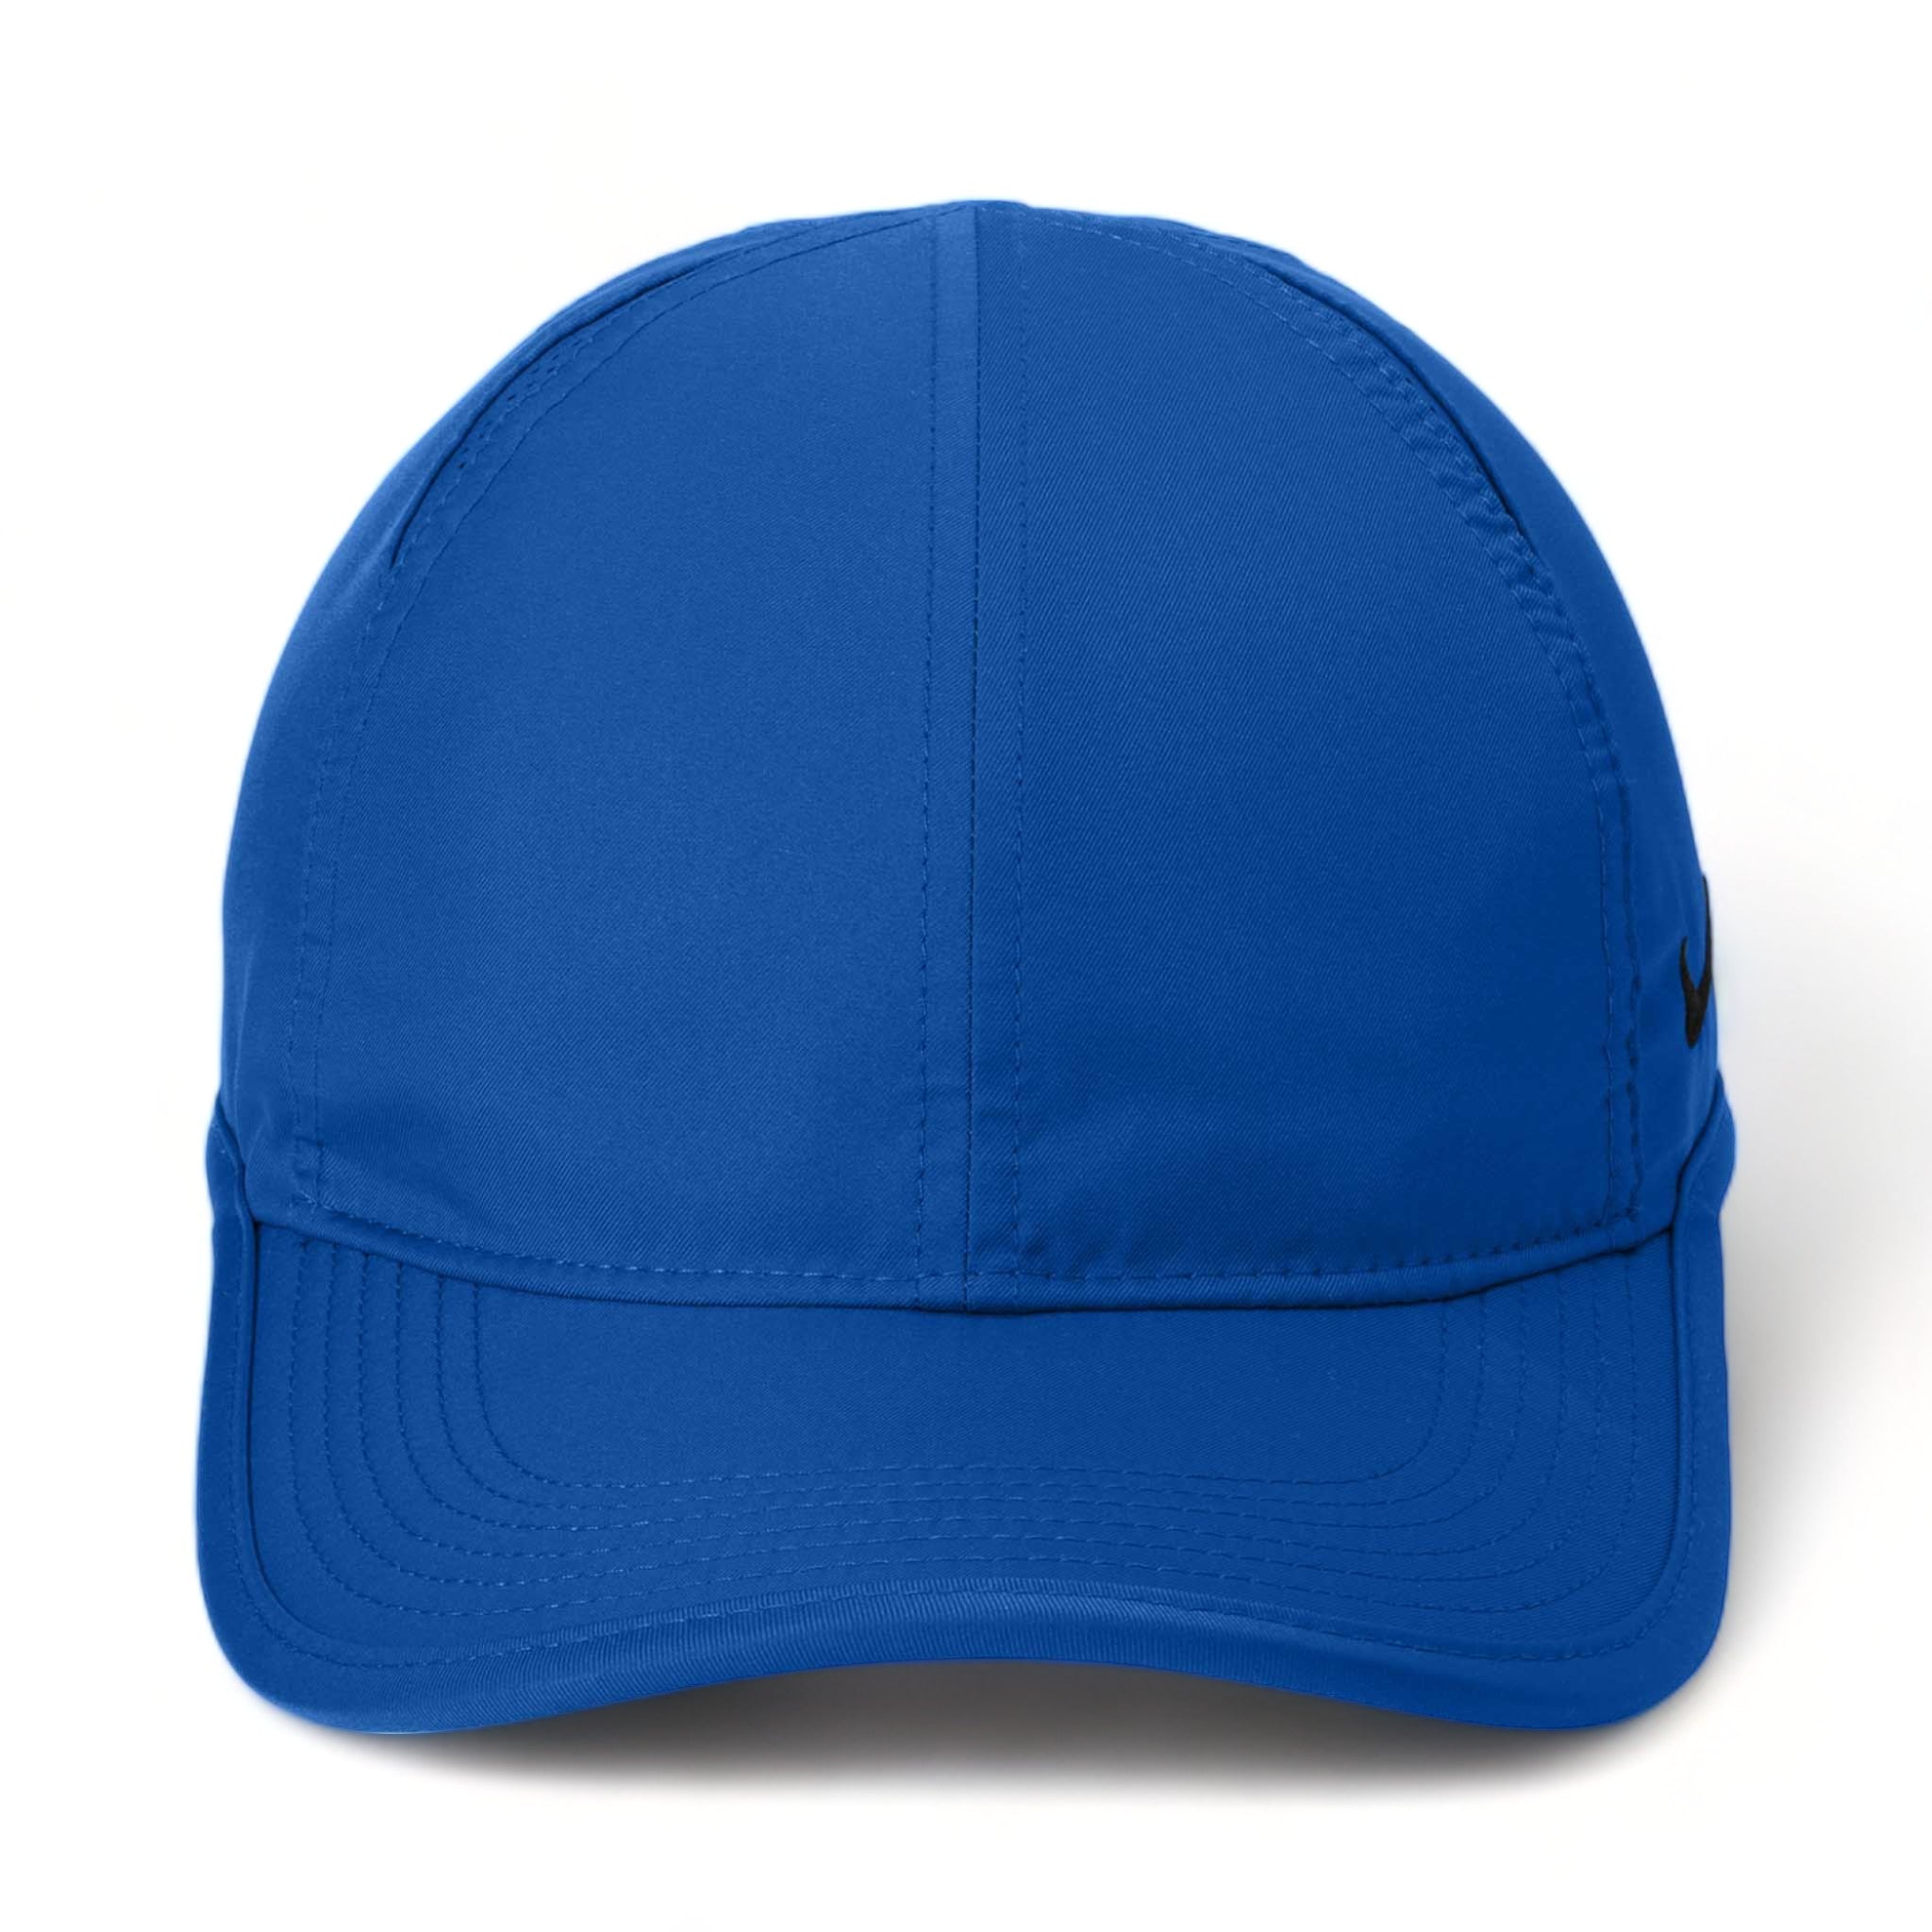 Front view of Nike NKFB5666 custom hat in game royal